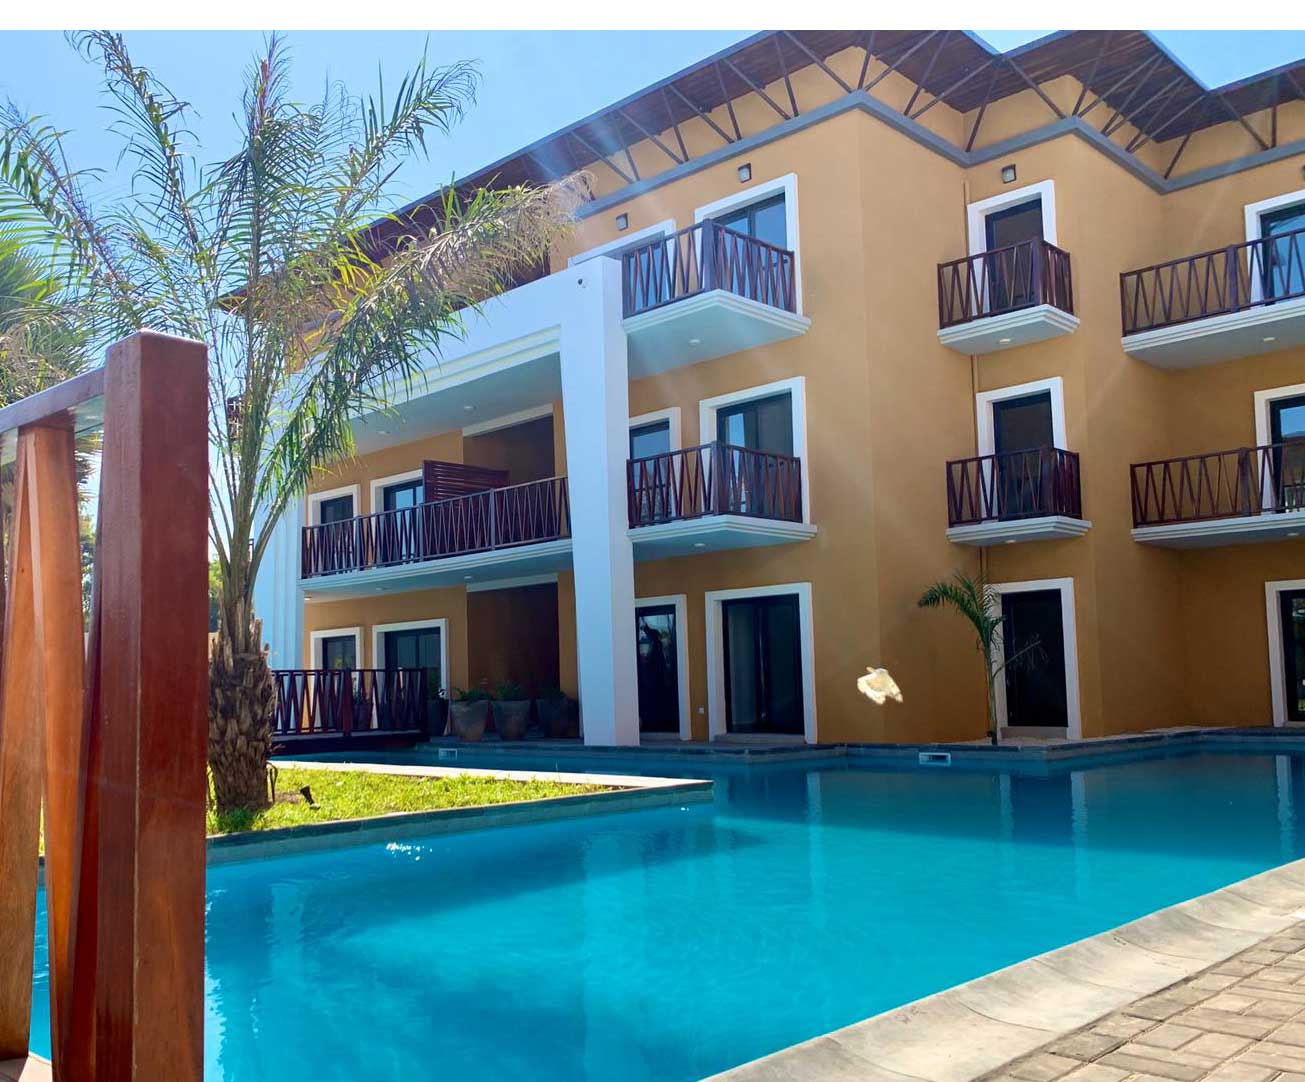 Forest View Gambia Apartments - Experience Our Passion For Hospitality